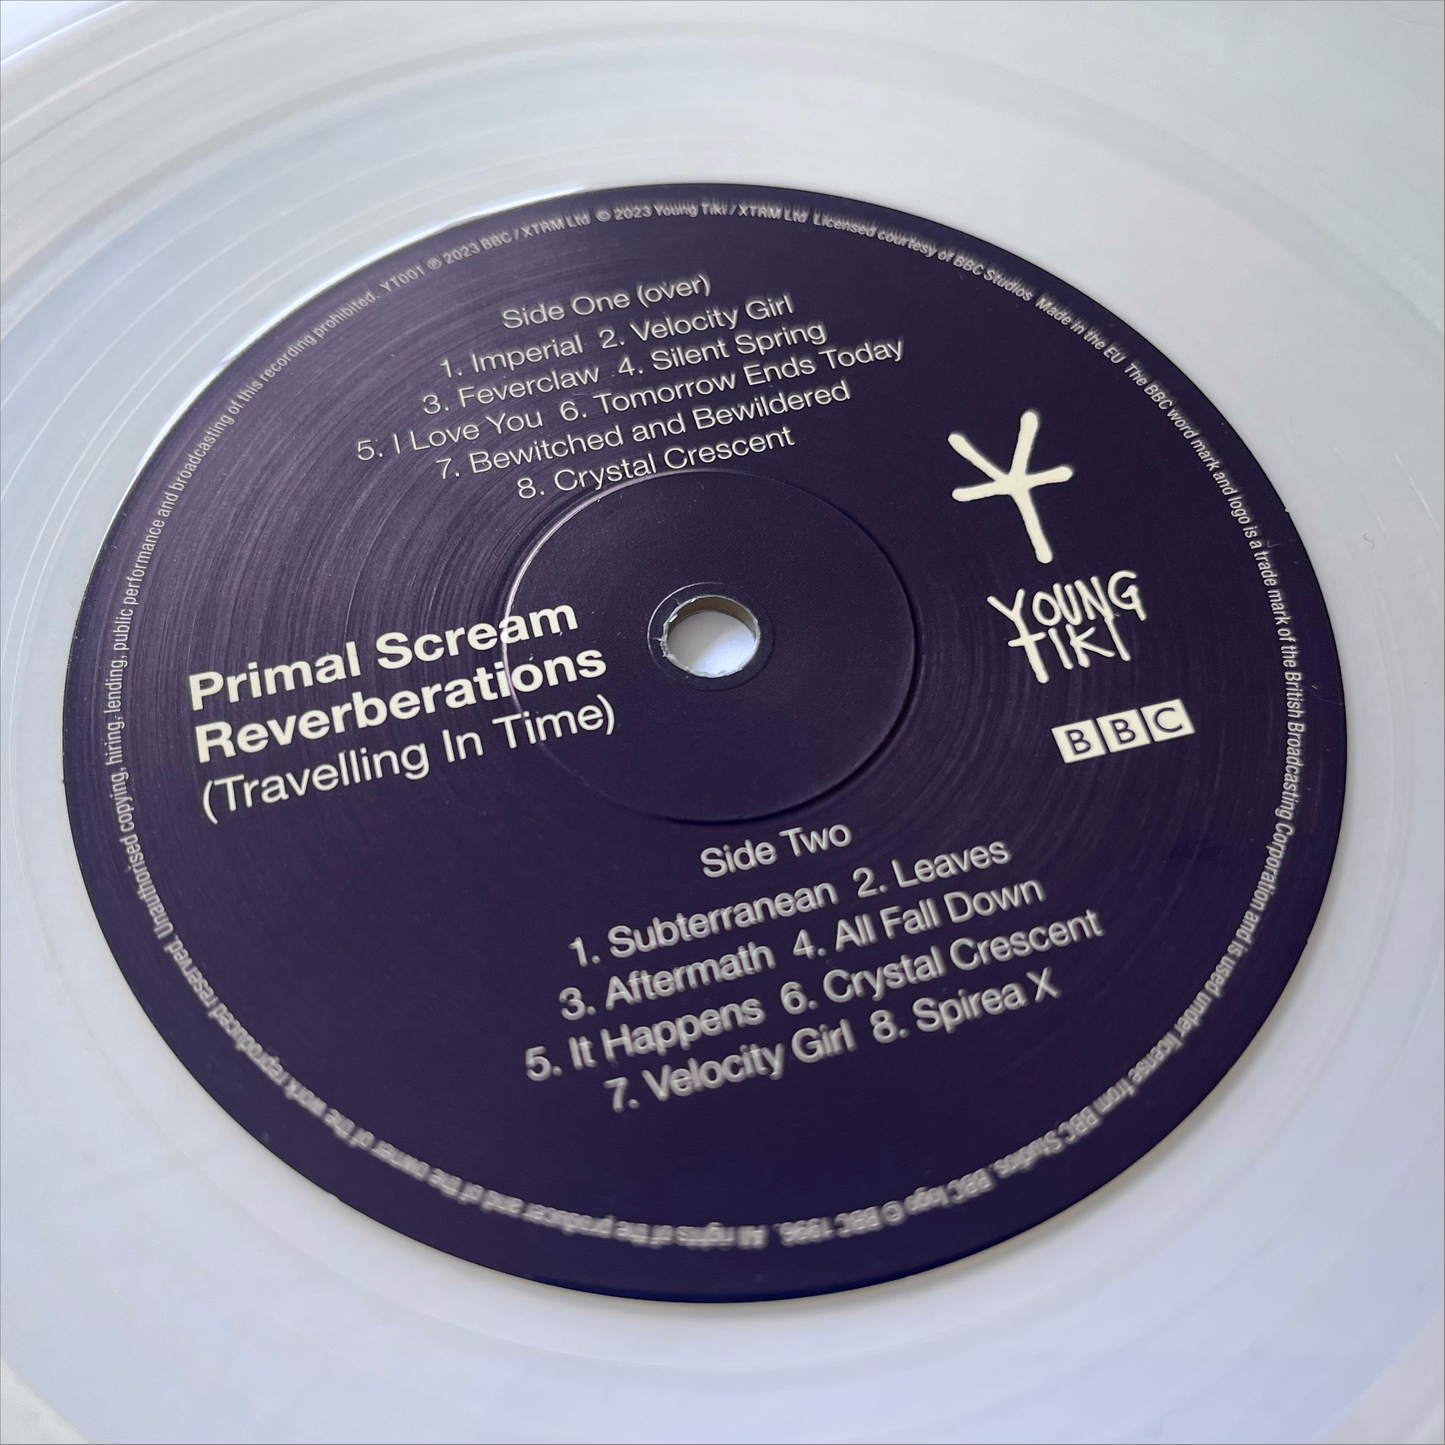 Reverberations (Travelling In Time) Limited Edition Clear Vinyl